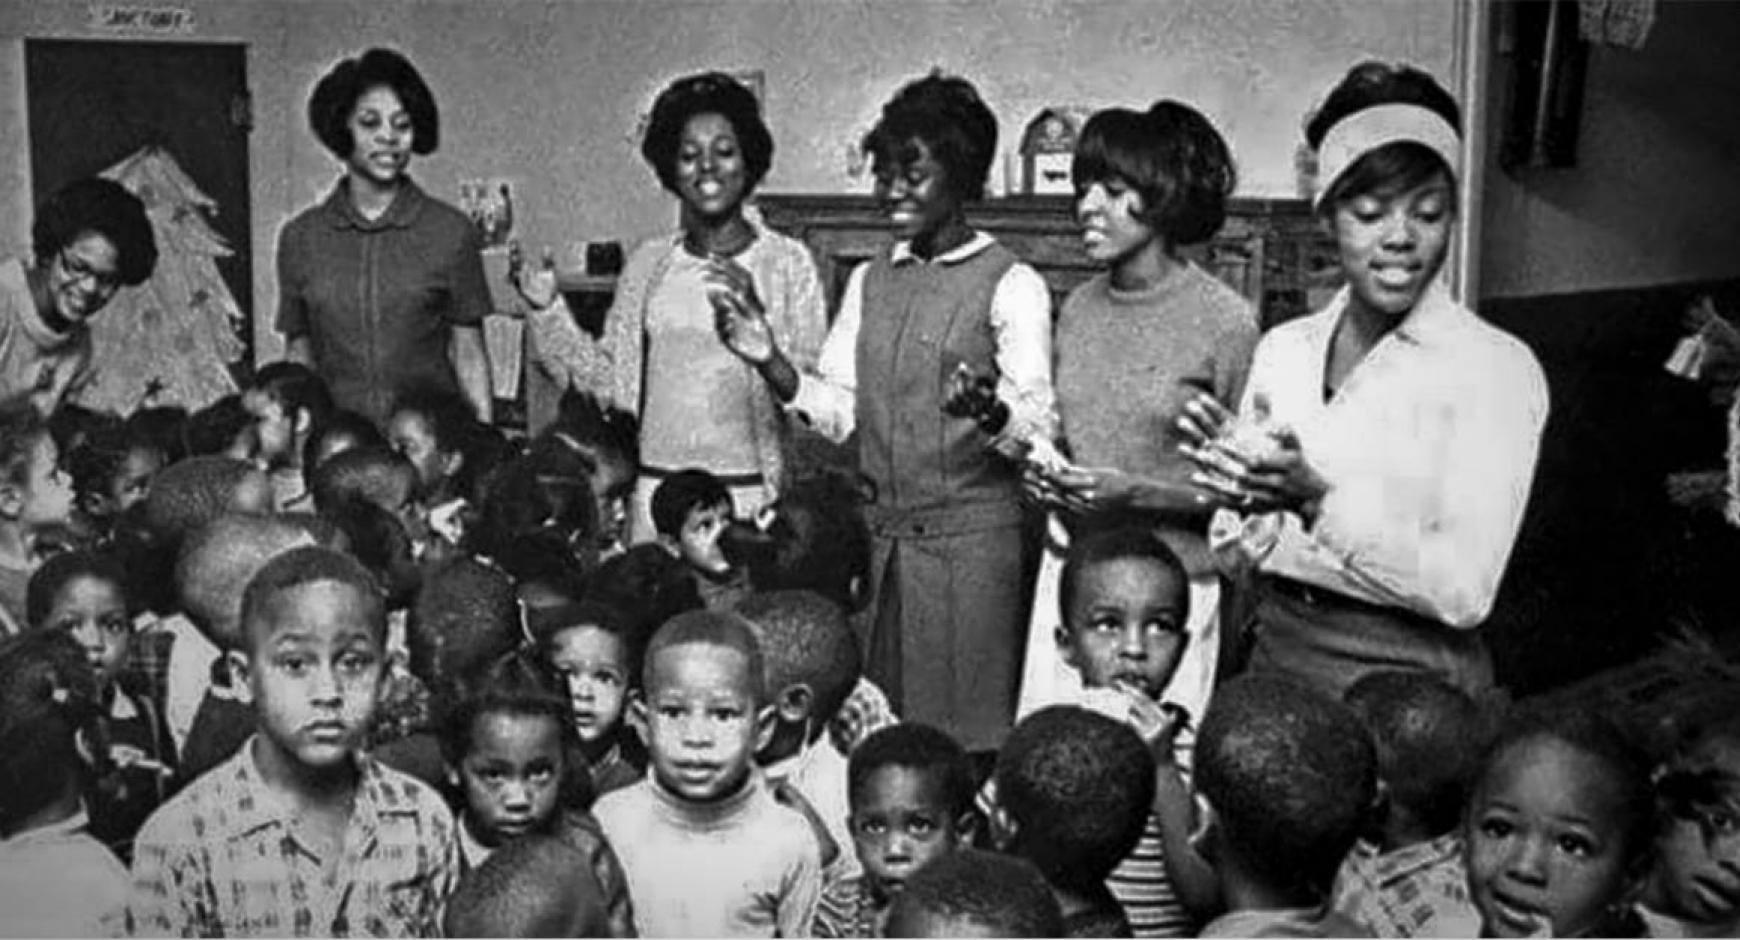 The image is a black and white photo of five Alpha Kappa Alpha Sorority members, along with a large group of school children.  The women seem to be leading the children in song.  A paper Christmas tree in the background suggests this photo was taken in December, while the style of clothing worn suggests the photo is from the sixties.